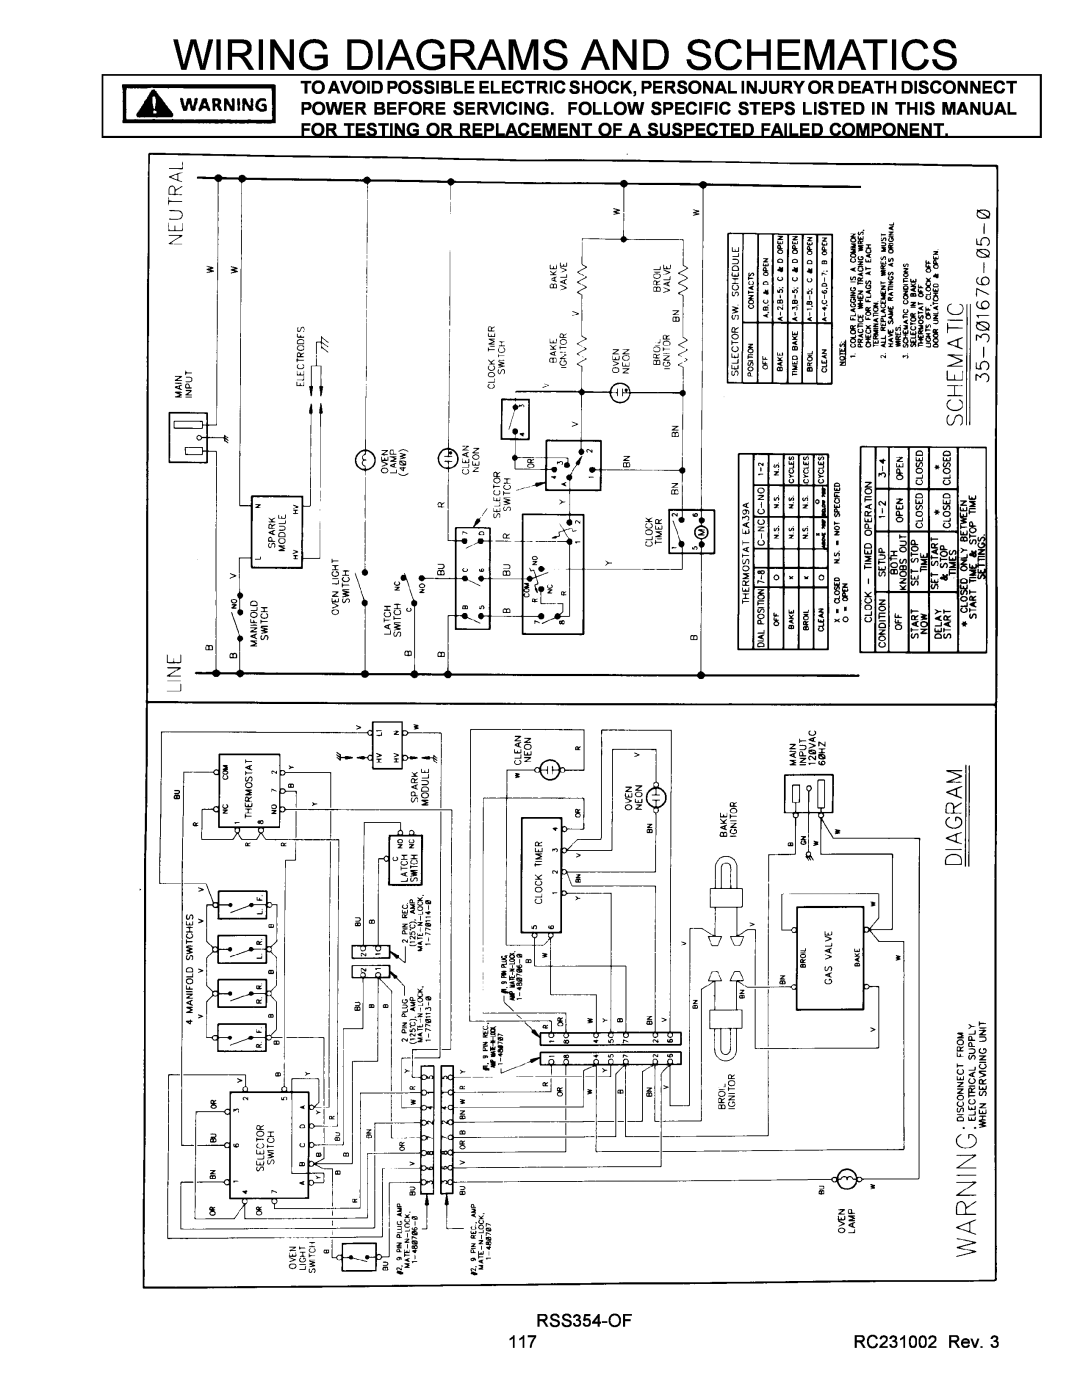 Amana RST service manual Wiring Diagrams And Schematics, RSS354-OF, RC231002 Rev 